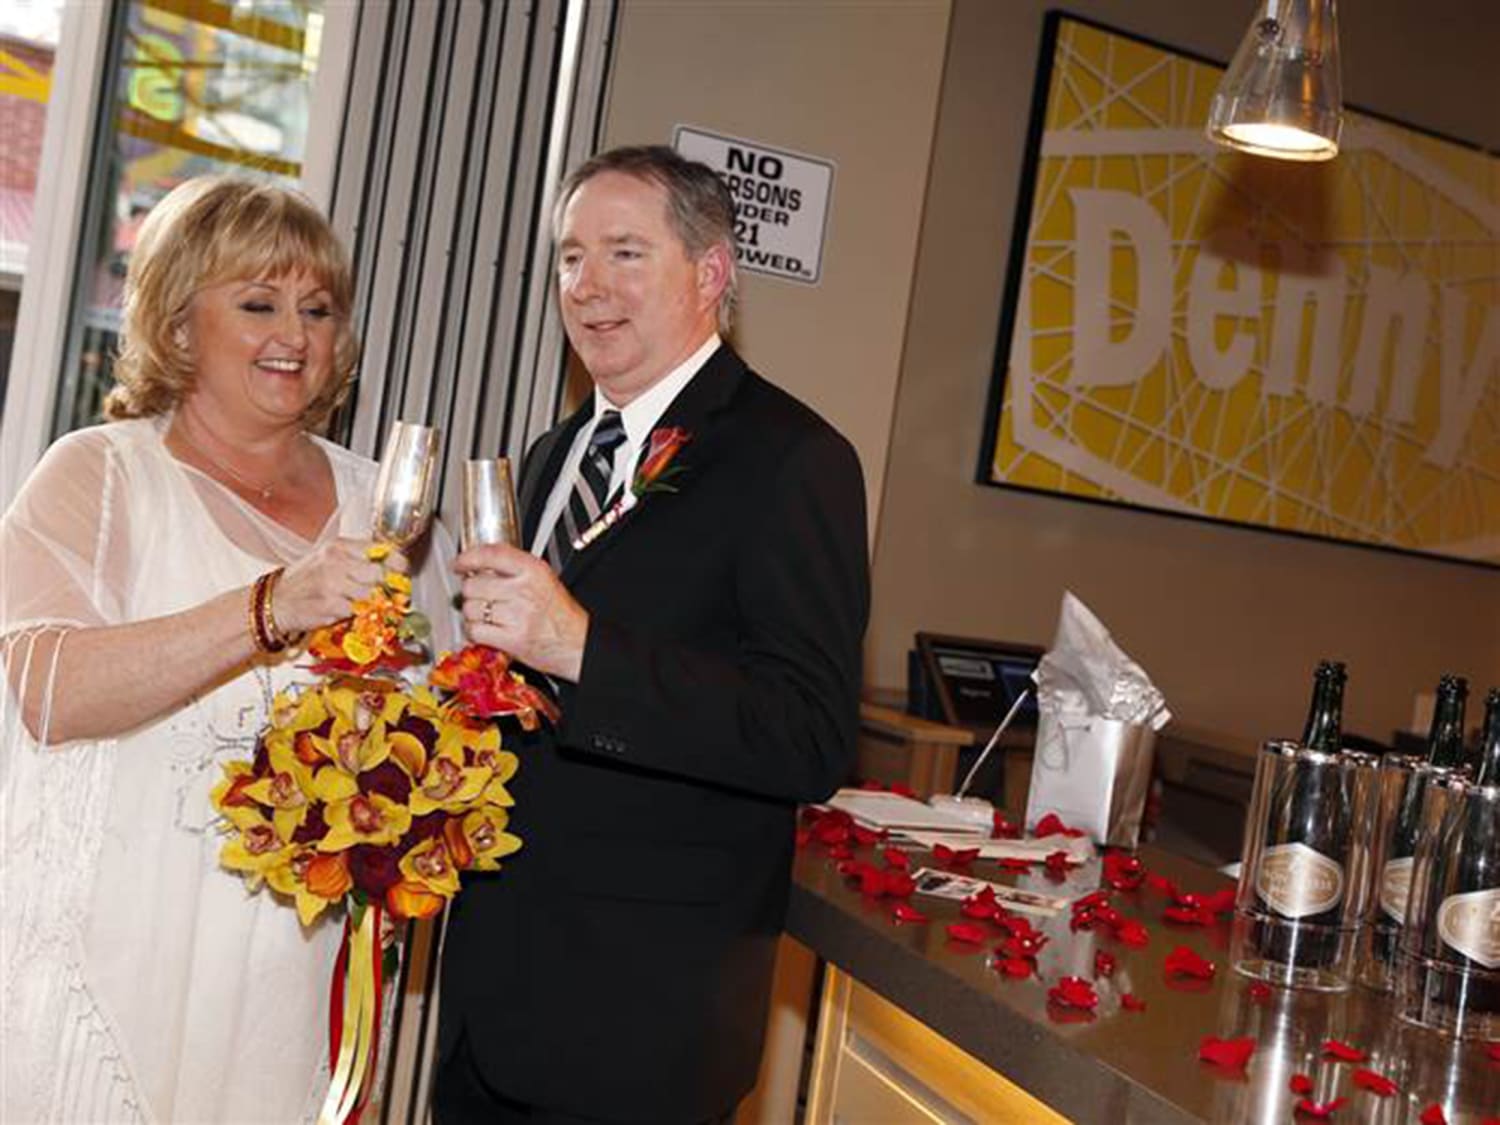 Get married for free this Valentine's Day at downtown Las Vegas